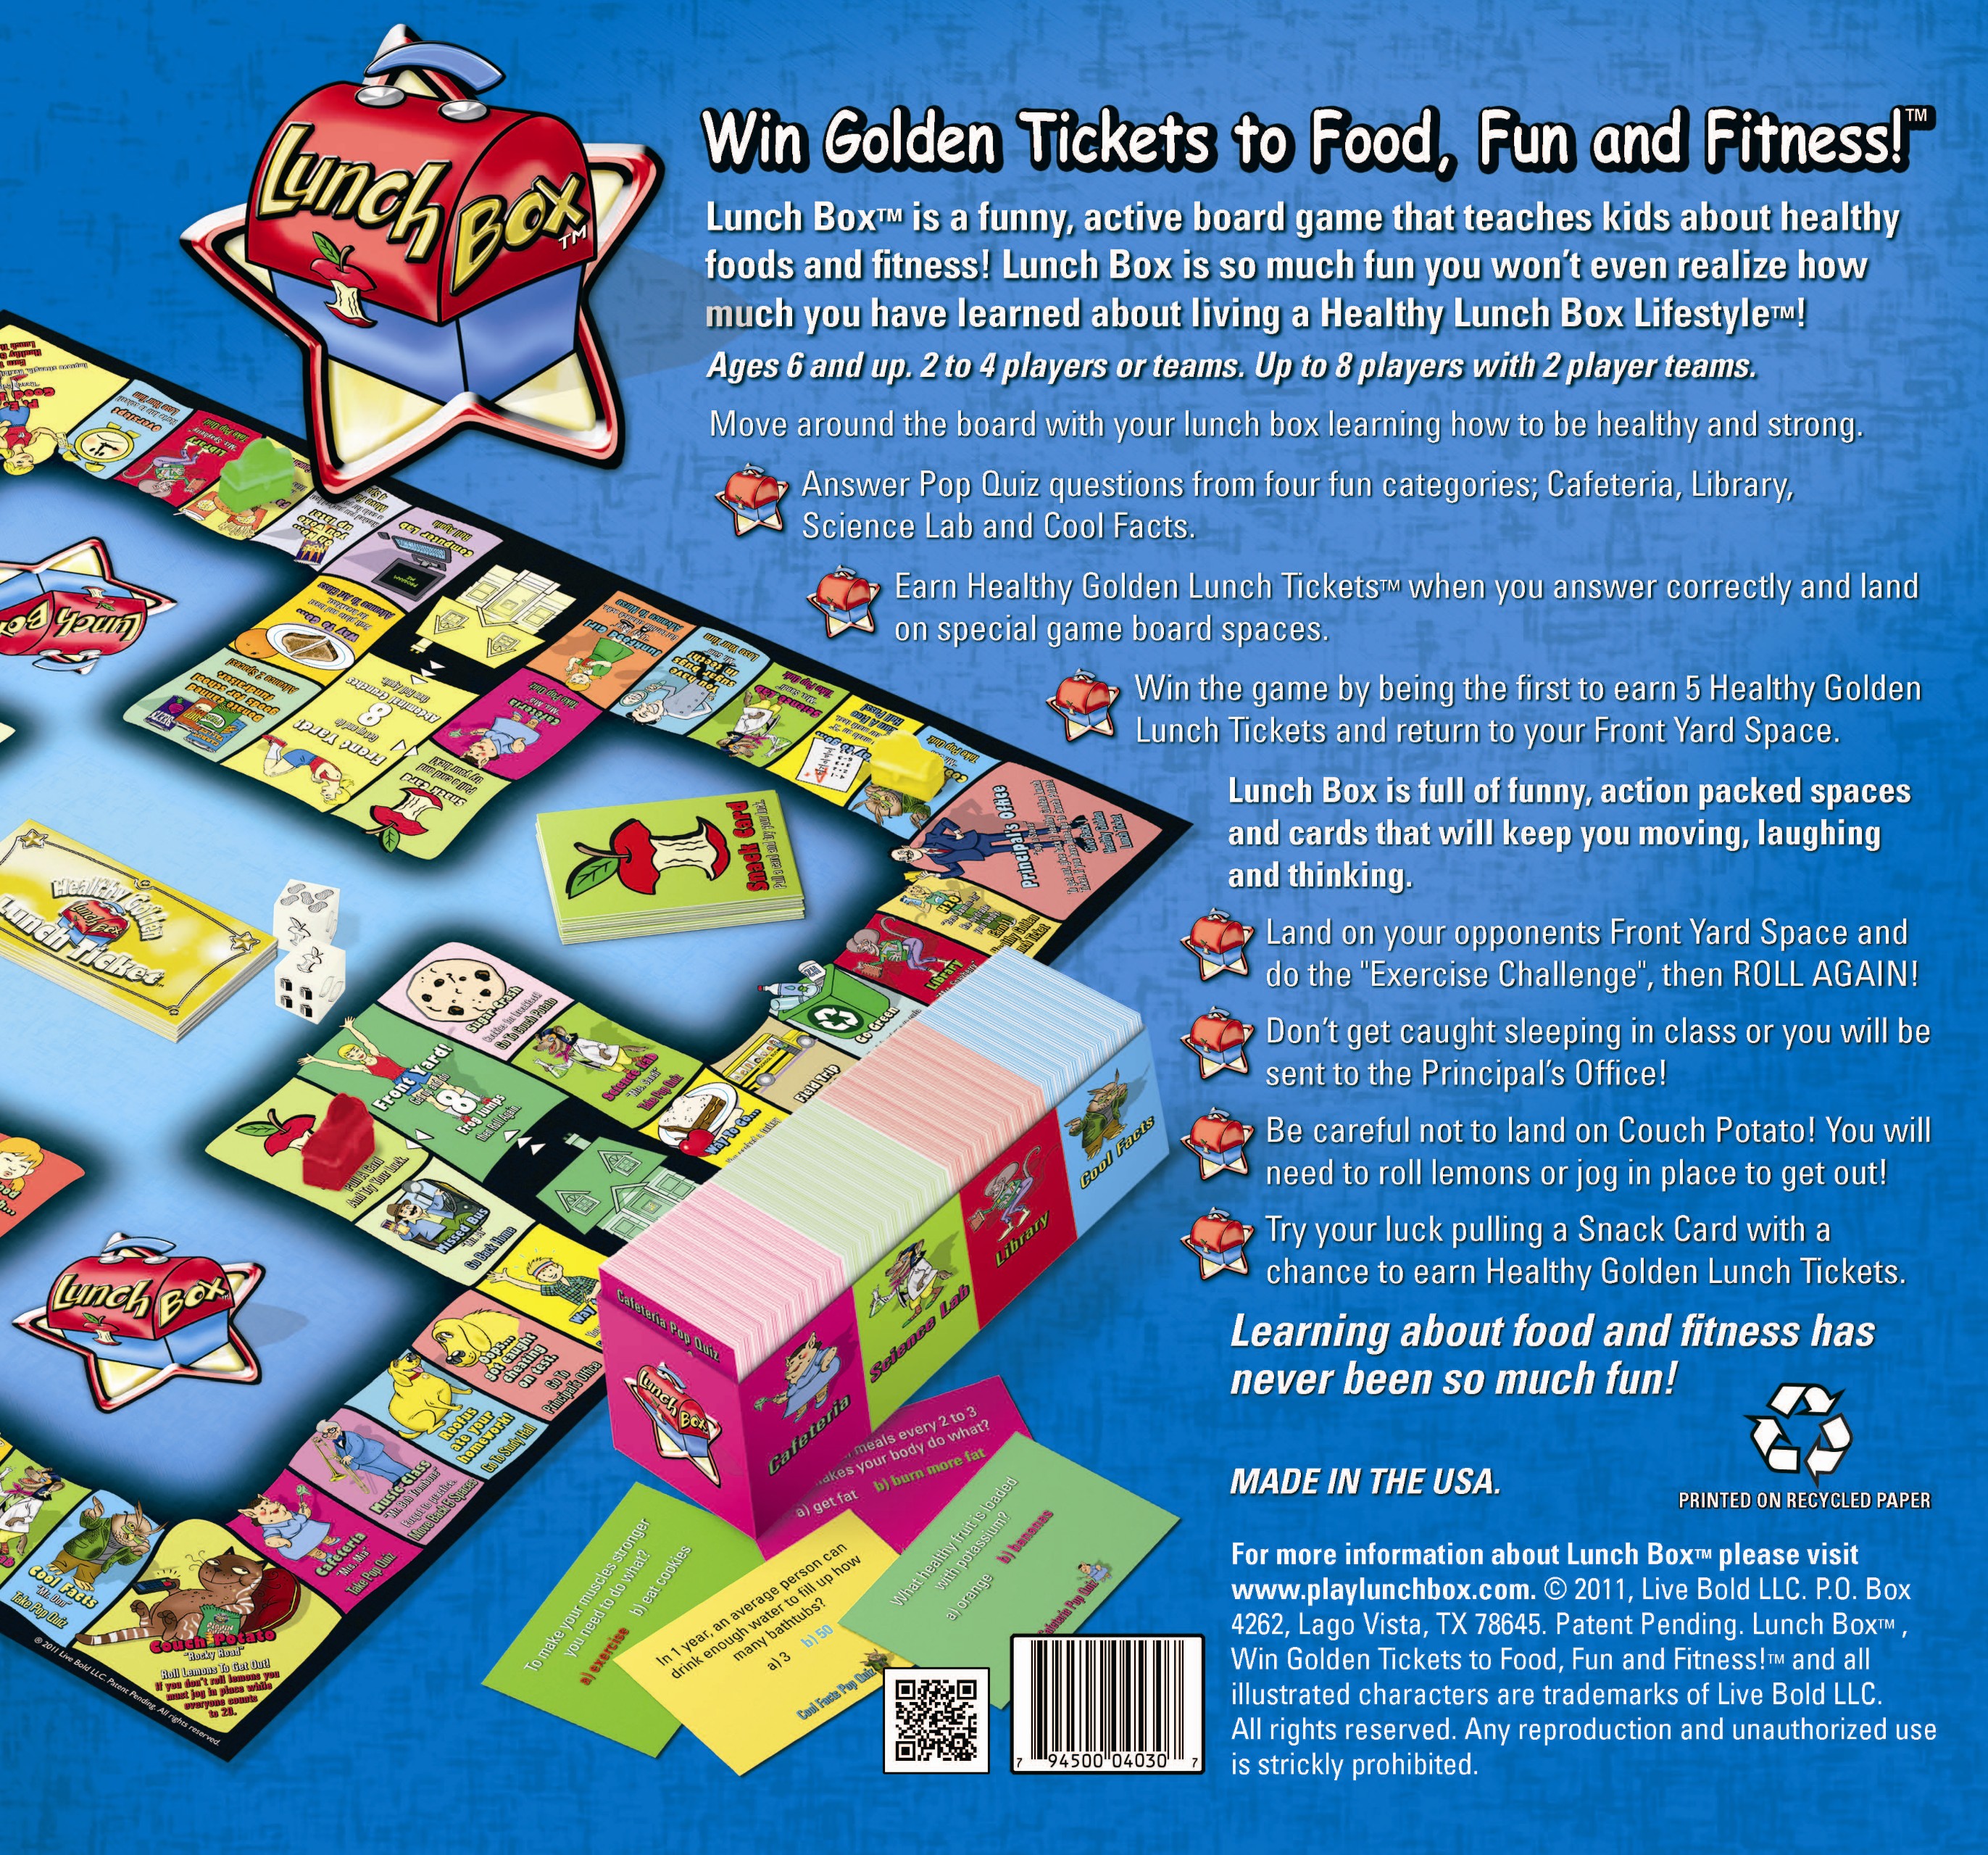 The Lunch Box Board Game Challenges Childhood Obesity